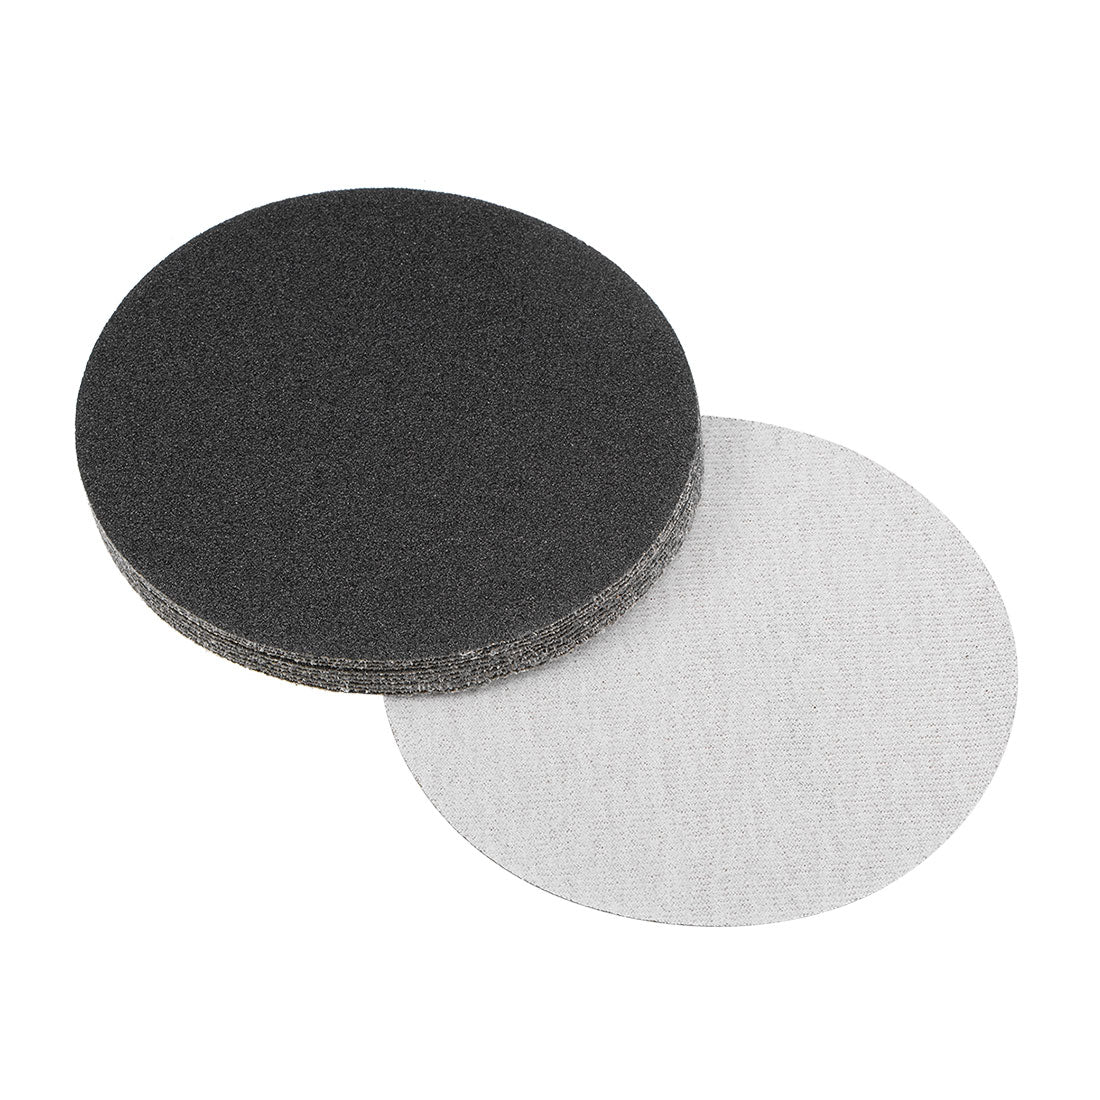 Uxcell Uxcell 5 inch Wet Dry Disc 320 Grit Hook and Loop Sanding Disc Silicon Carbide 10pcs